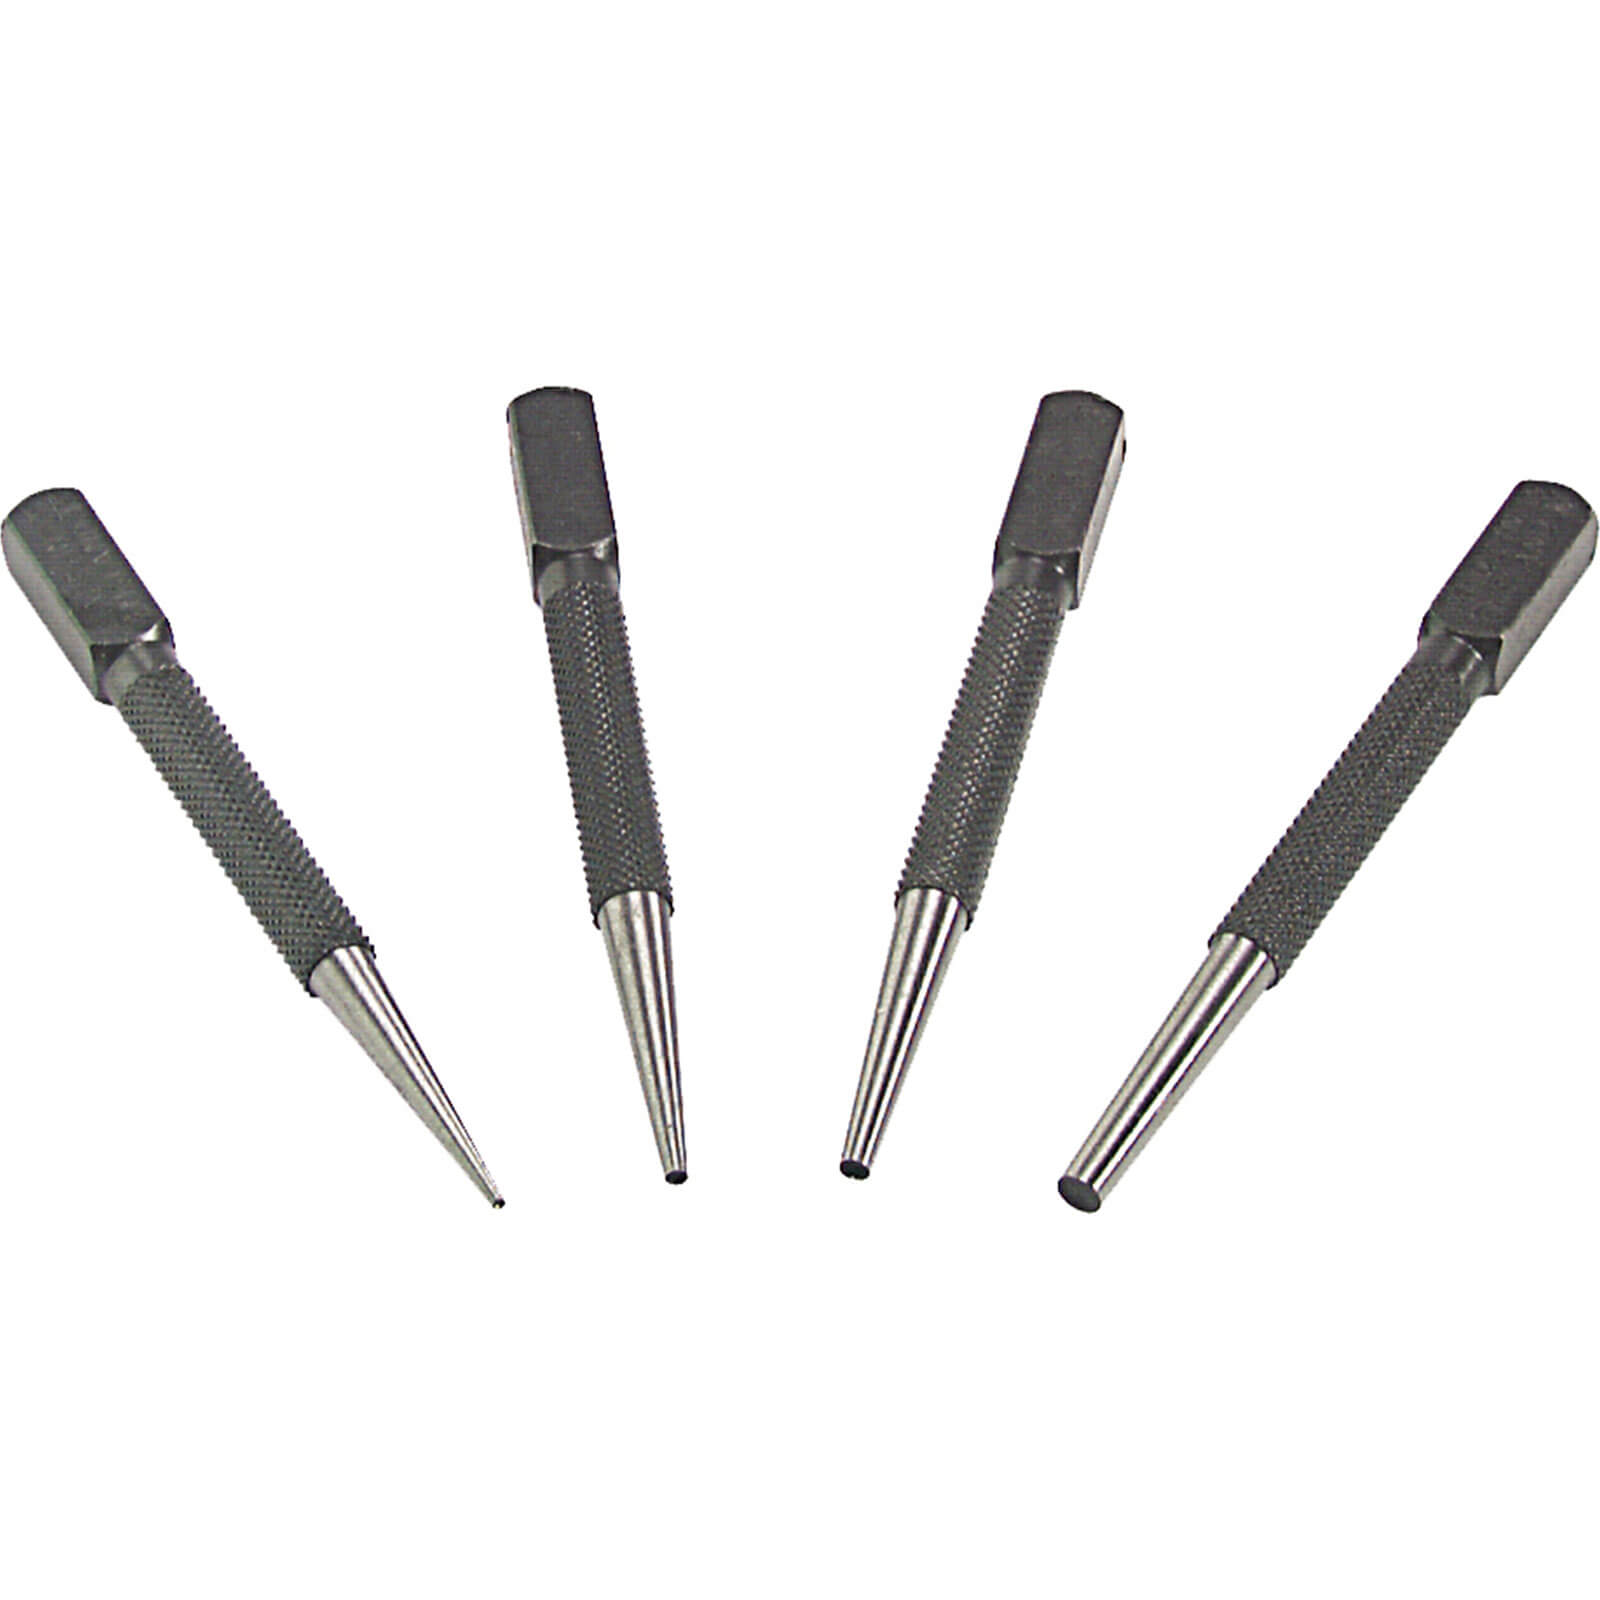 Image of Priory 4 Piece Nail Punch Set